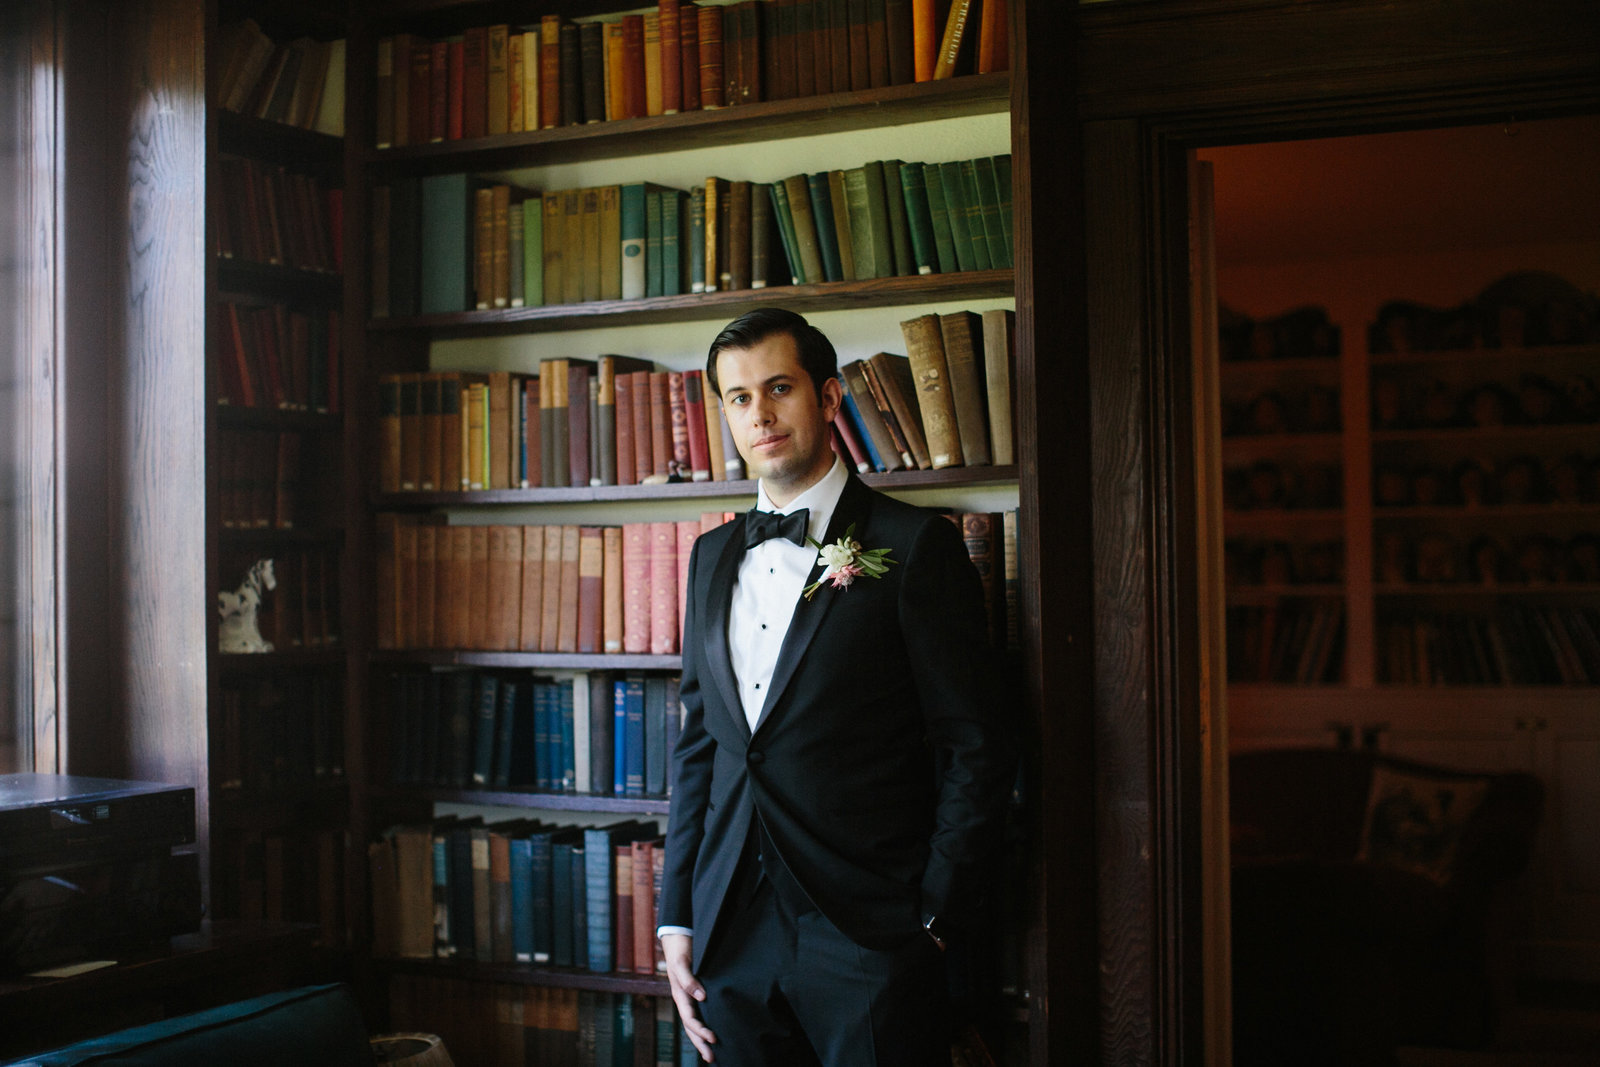 Groom photographed in the library of this historic Bed and Breakfast at Fernbrook Inn.